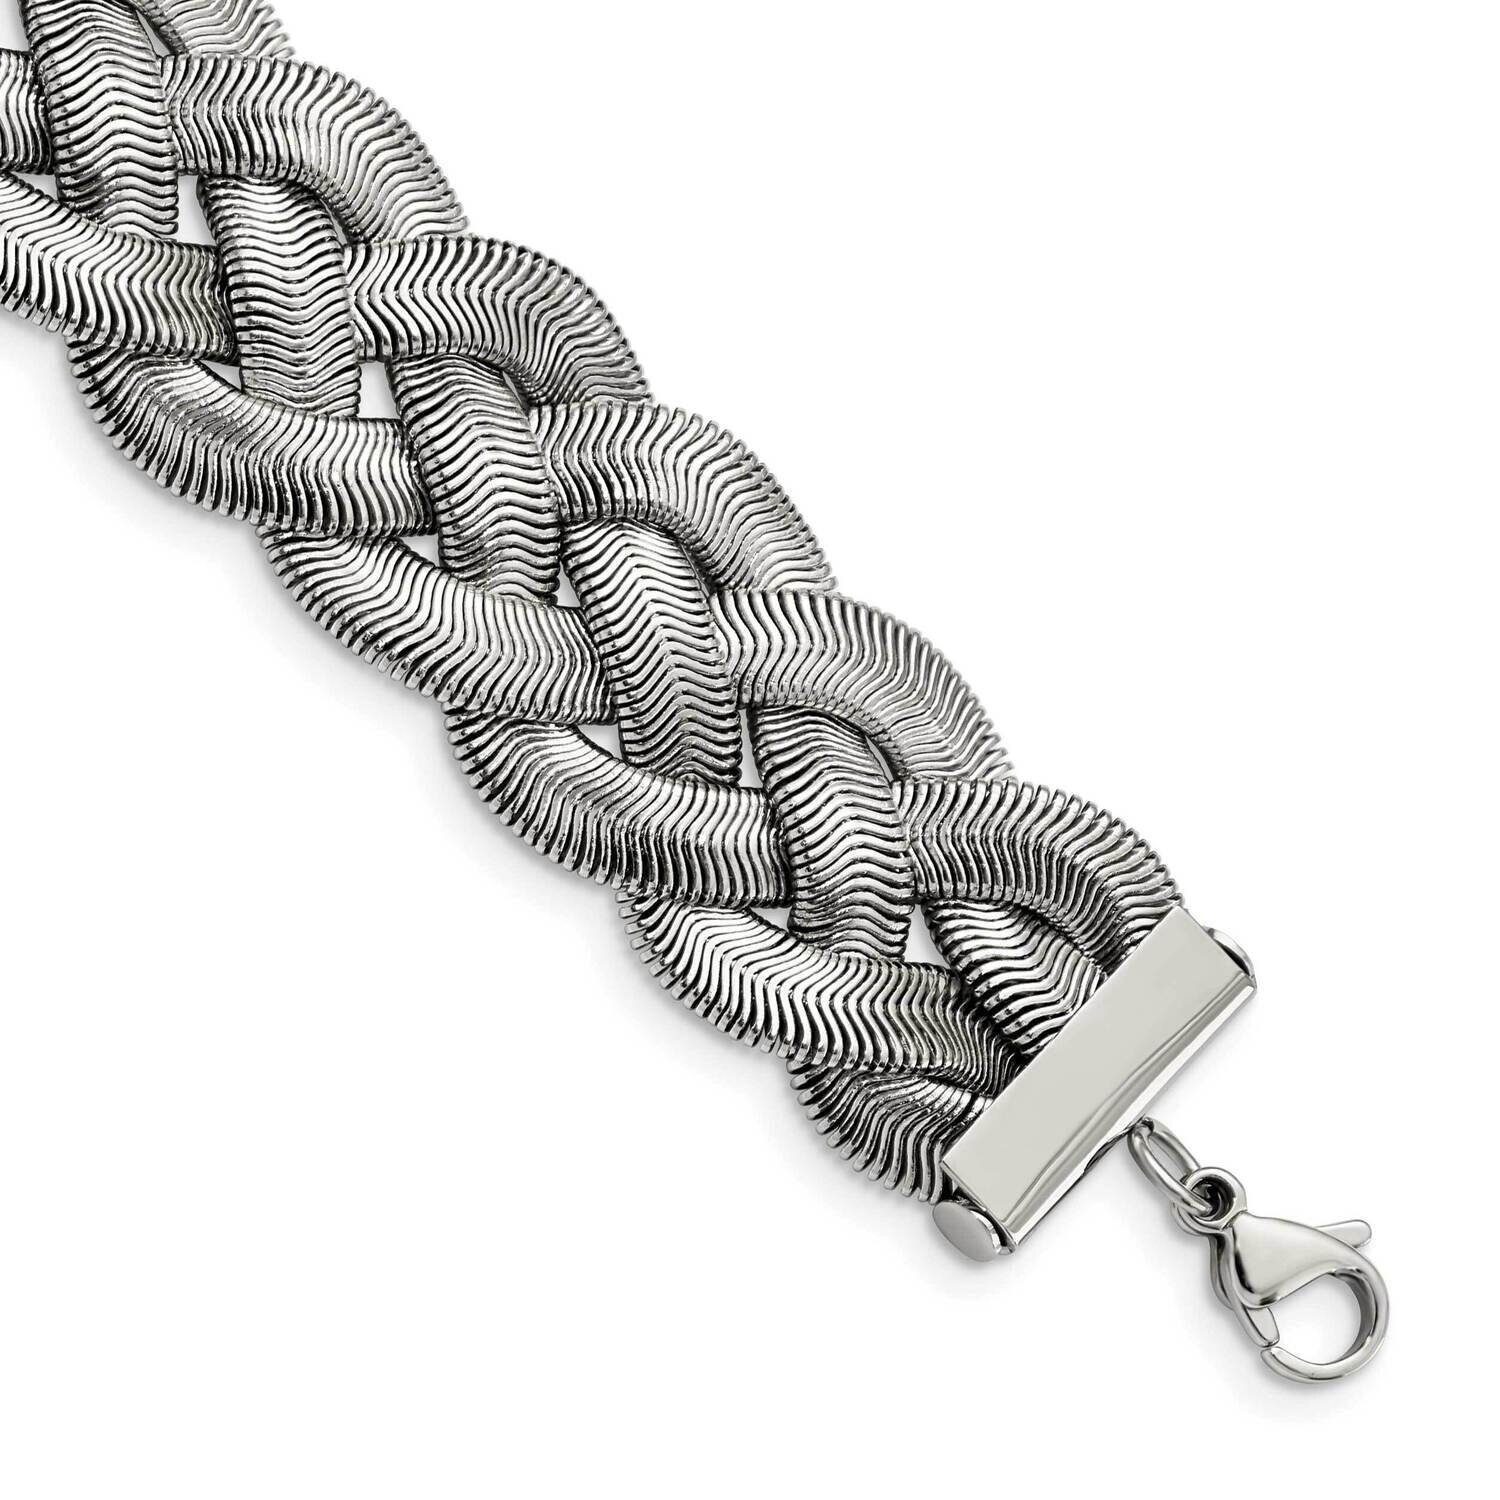 Braided with 1.25 Inch Extension Bracelet Stainless Steel Polished SRB2112-7